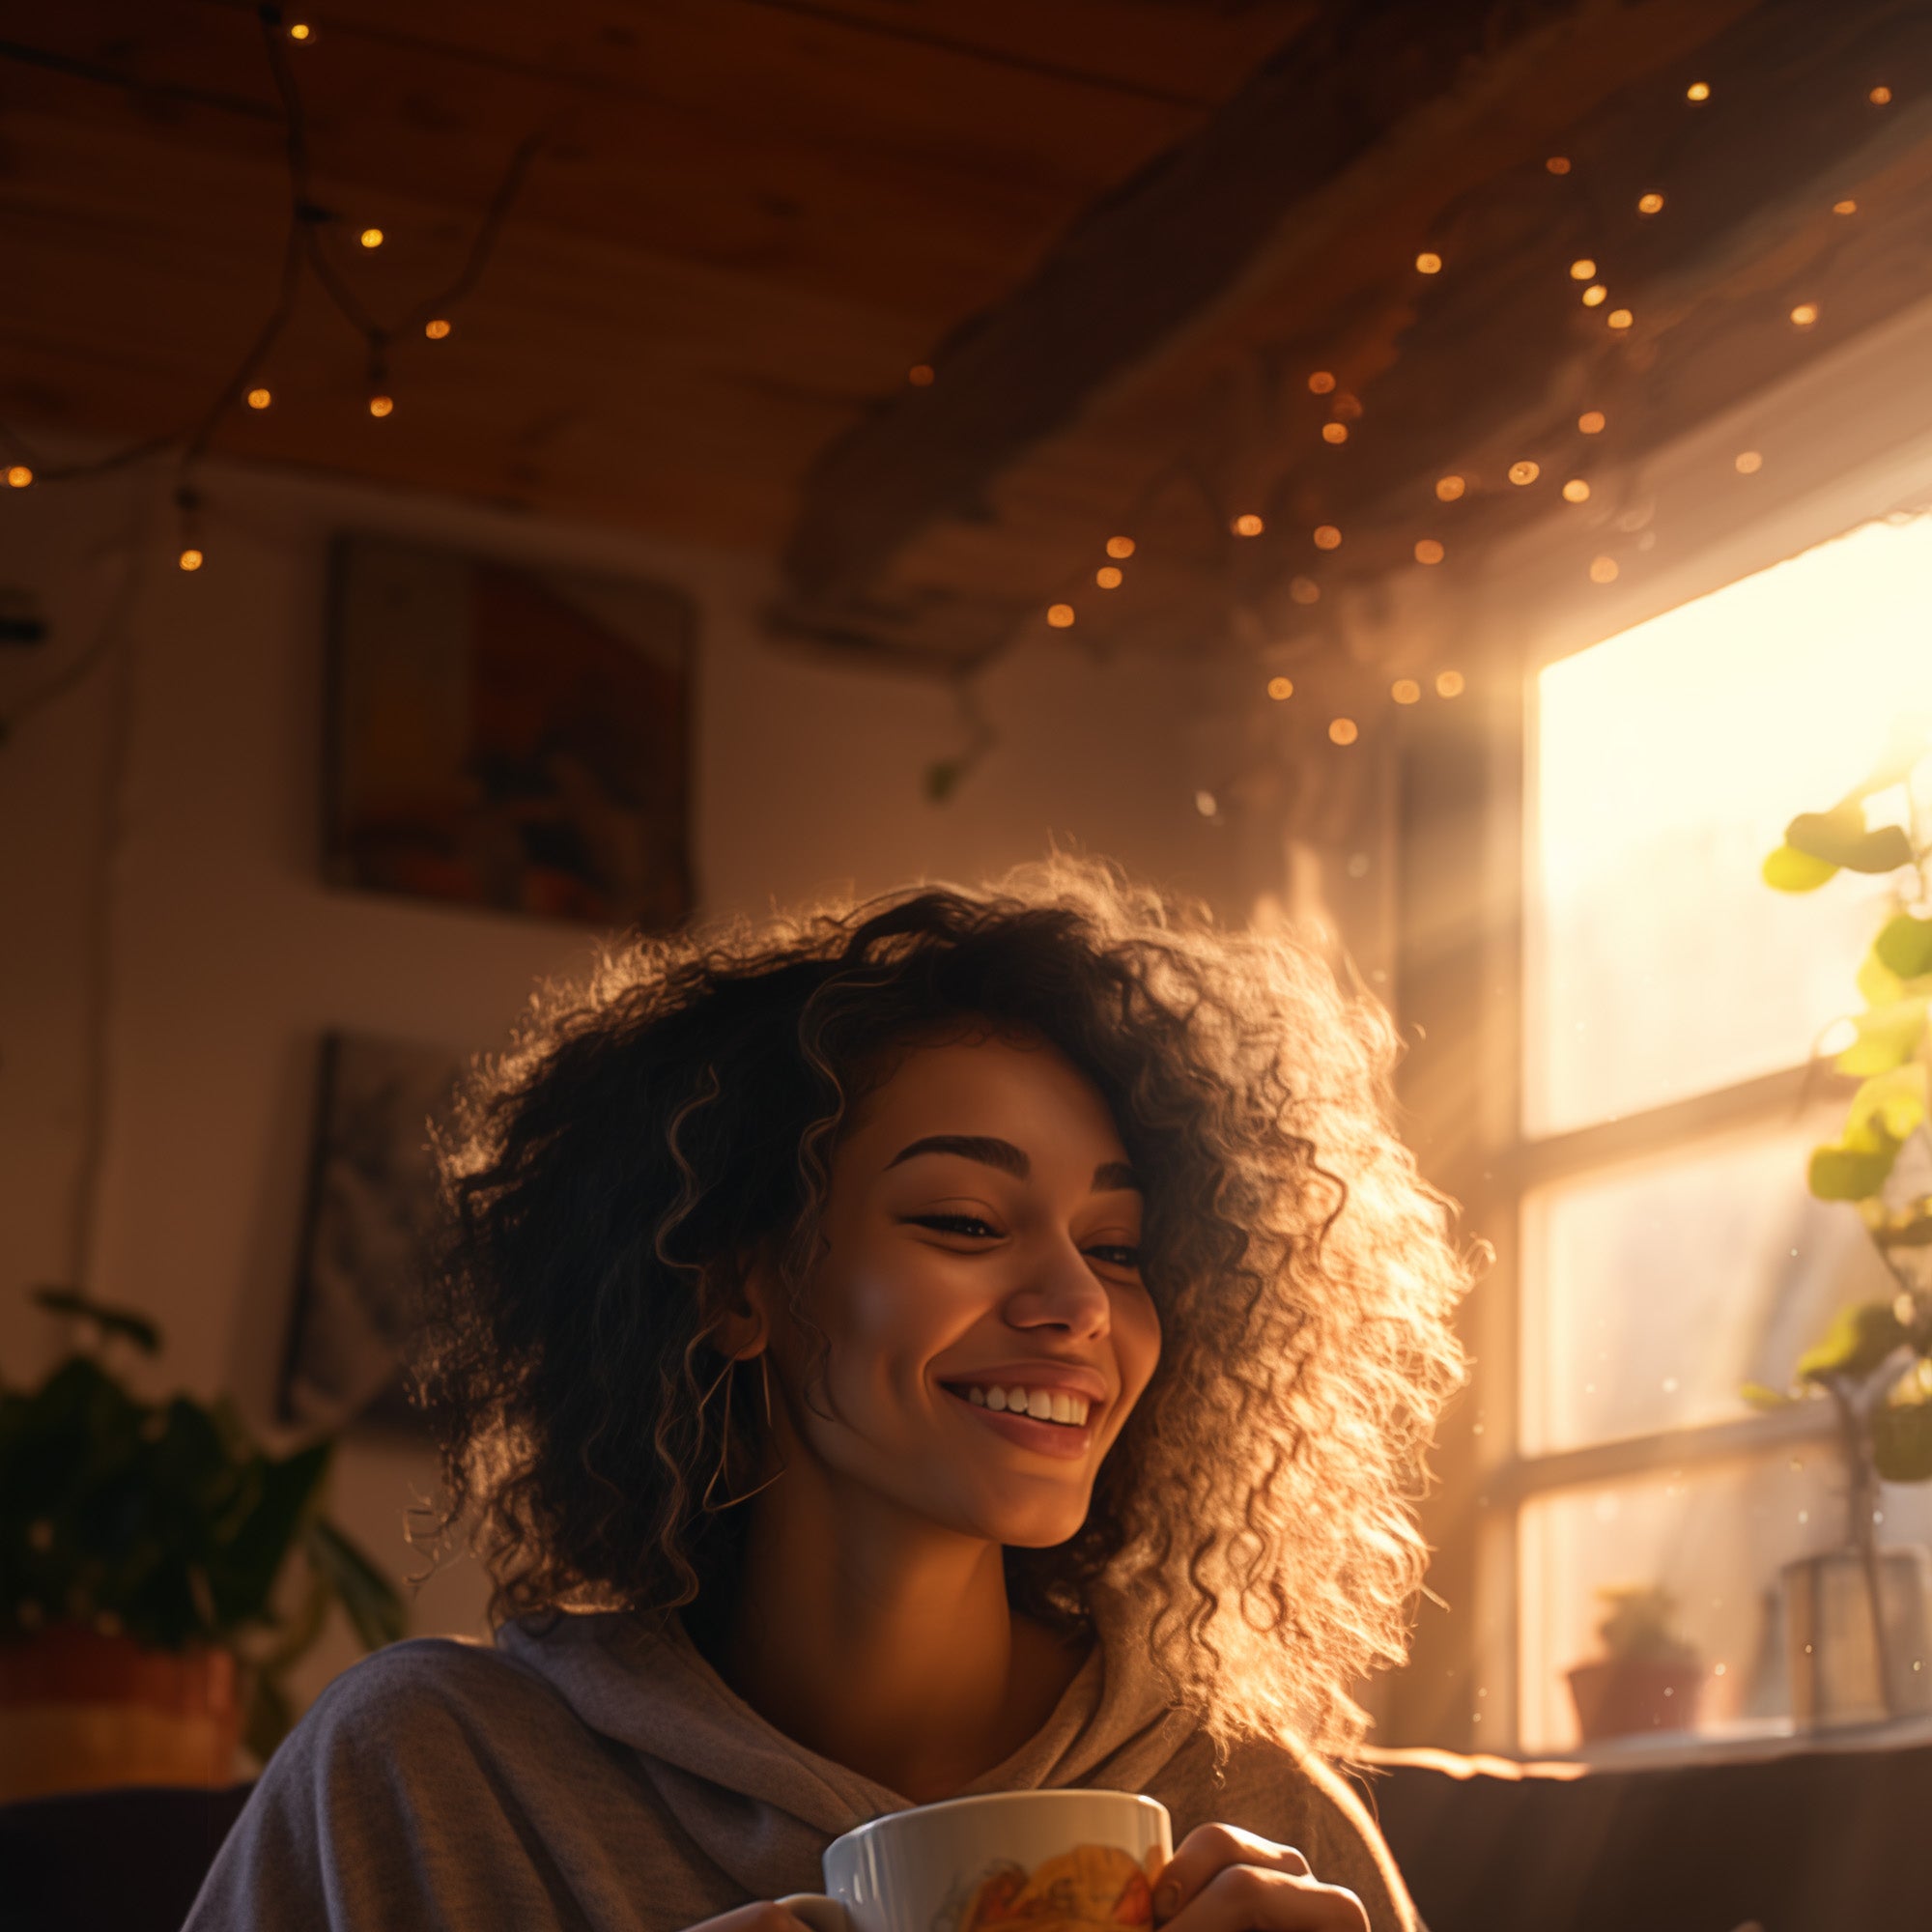 A woman enjoying a cup of tea after adding a dose of kanna extract co lift sceletium tortuosum extract powder to improve her mood after feeling down and sad